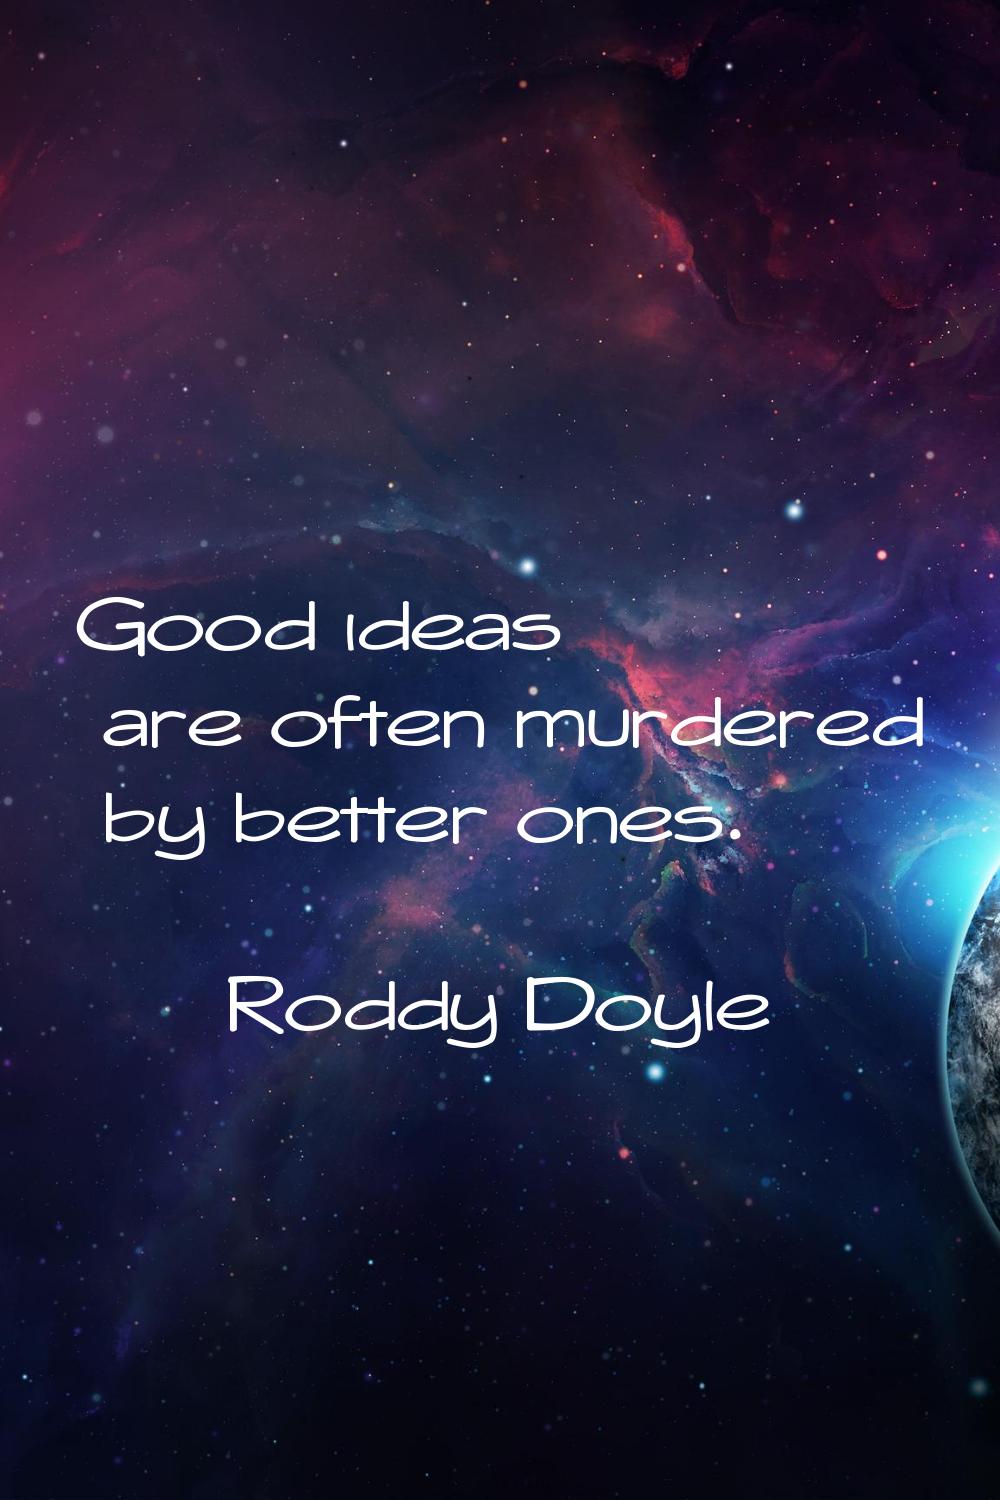 Good ideas are often murdered by better ones.